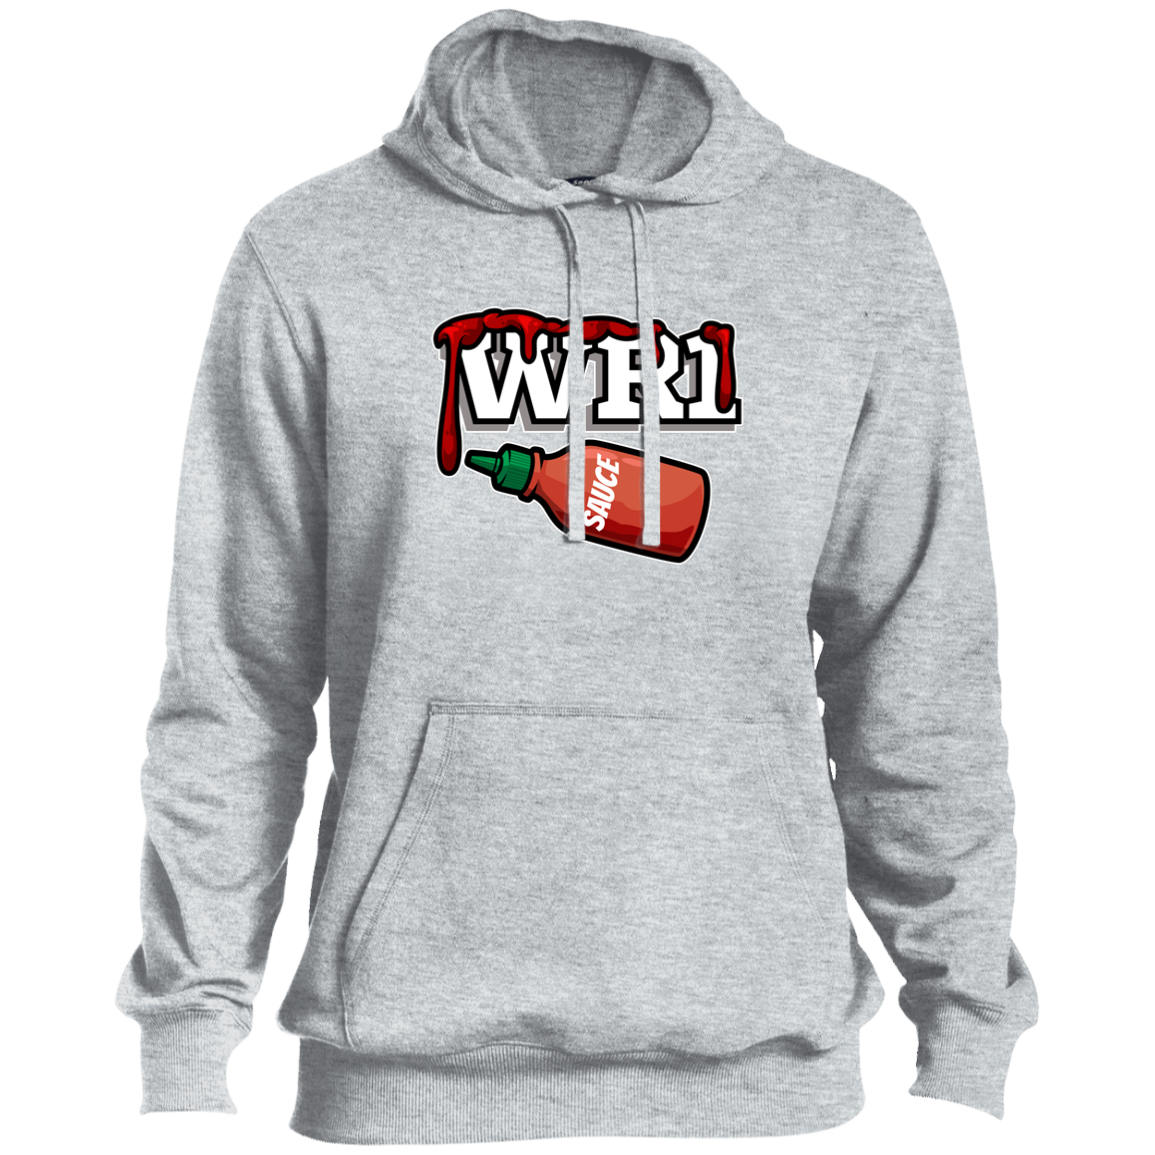 Covered in Sauce Pullover Hoodie